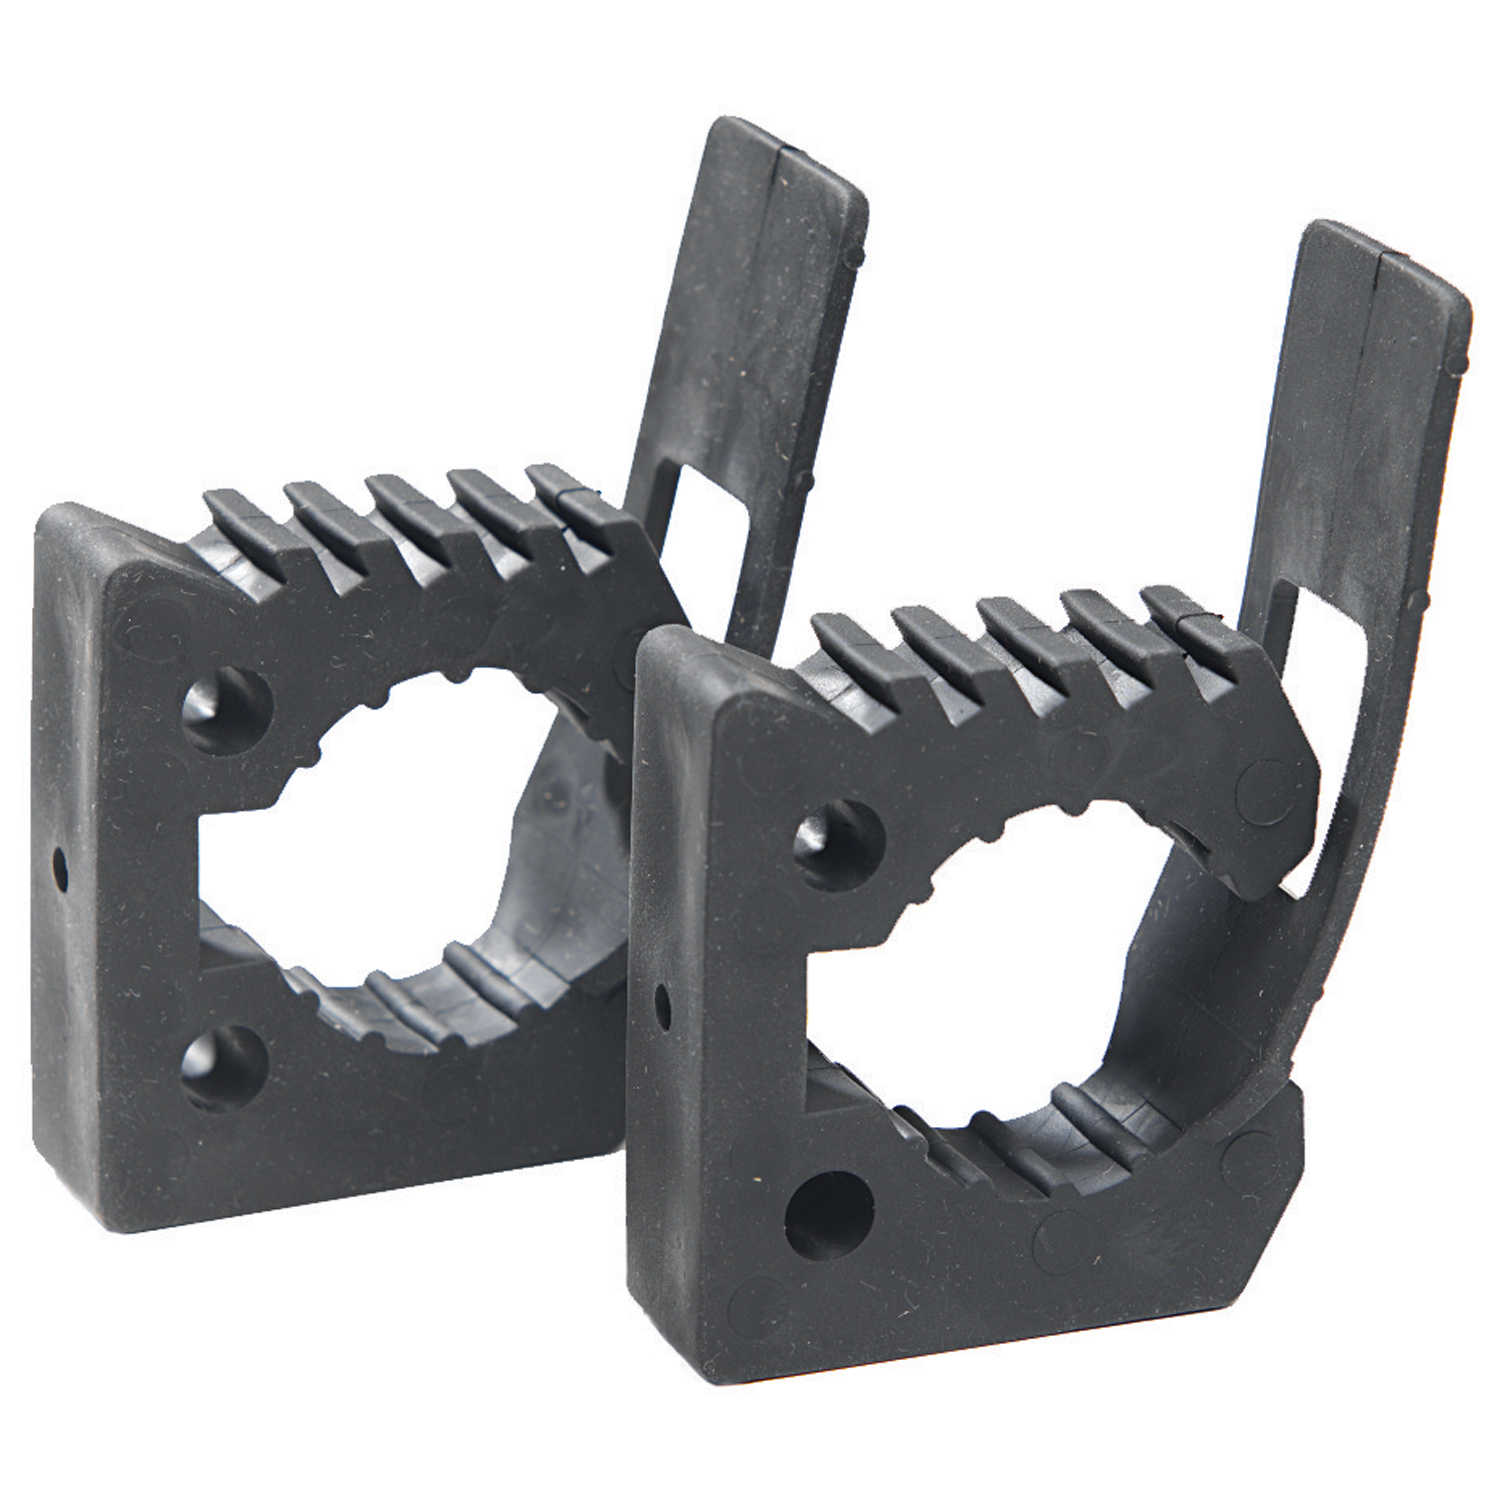 QuickFist Original OnePiece Rubber Clamp | Forestry Suppliers, Inc.